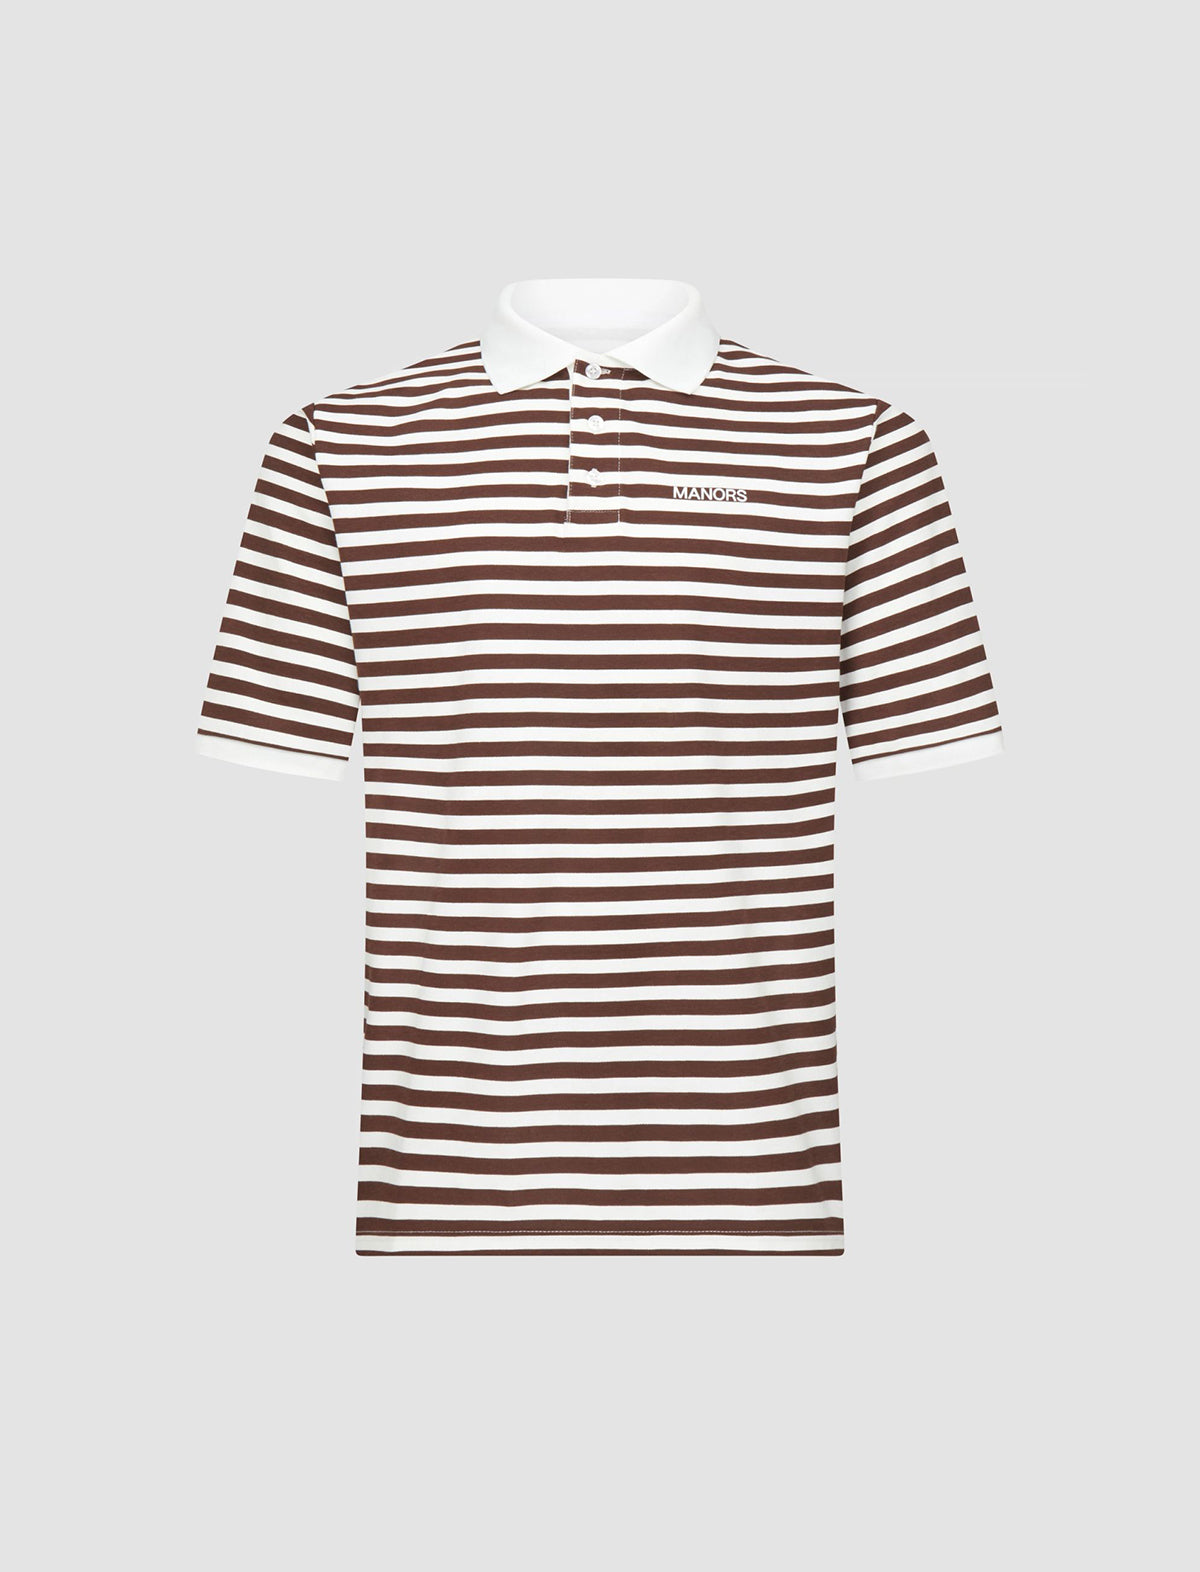 MANORS GOLF Striped Pique Polo in Cream / Brown